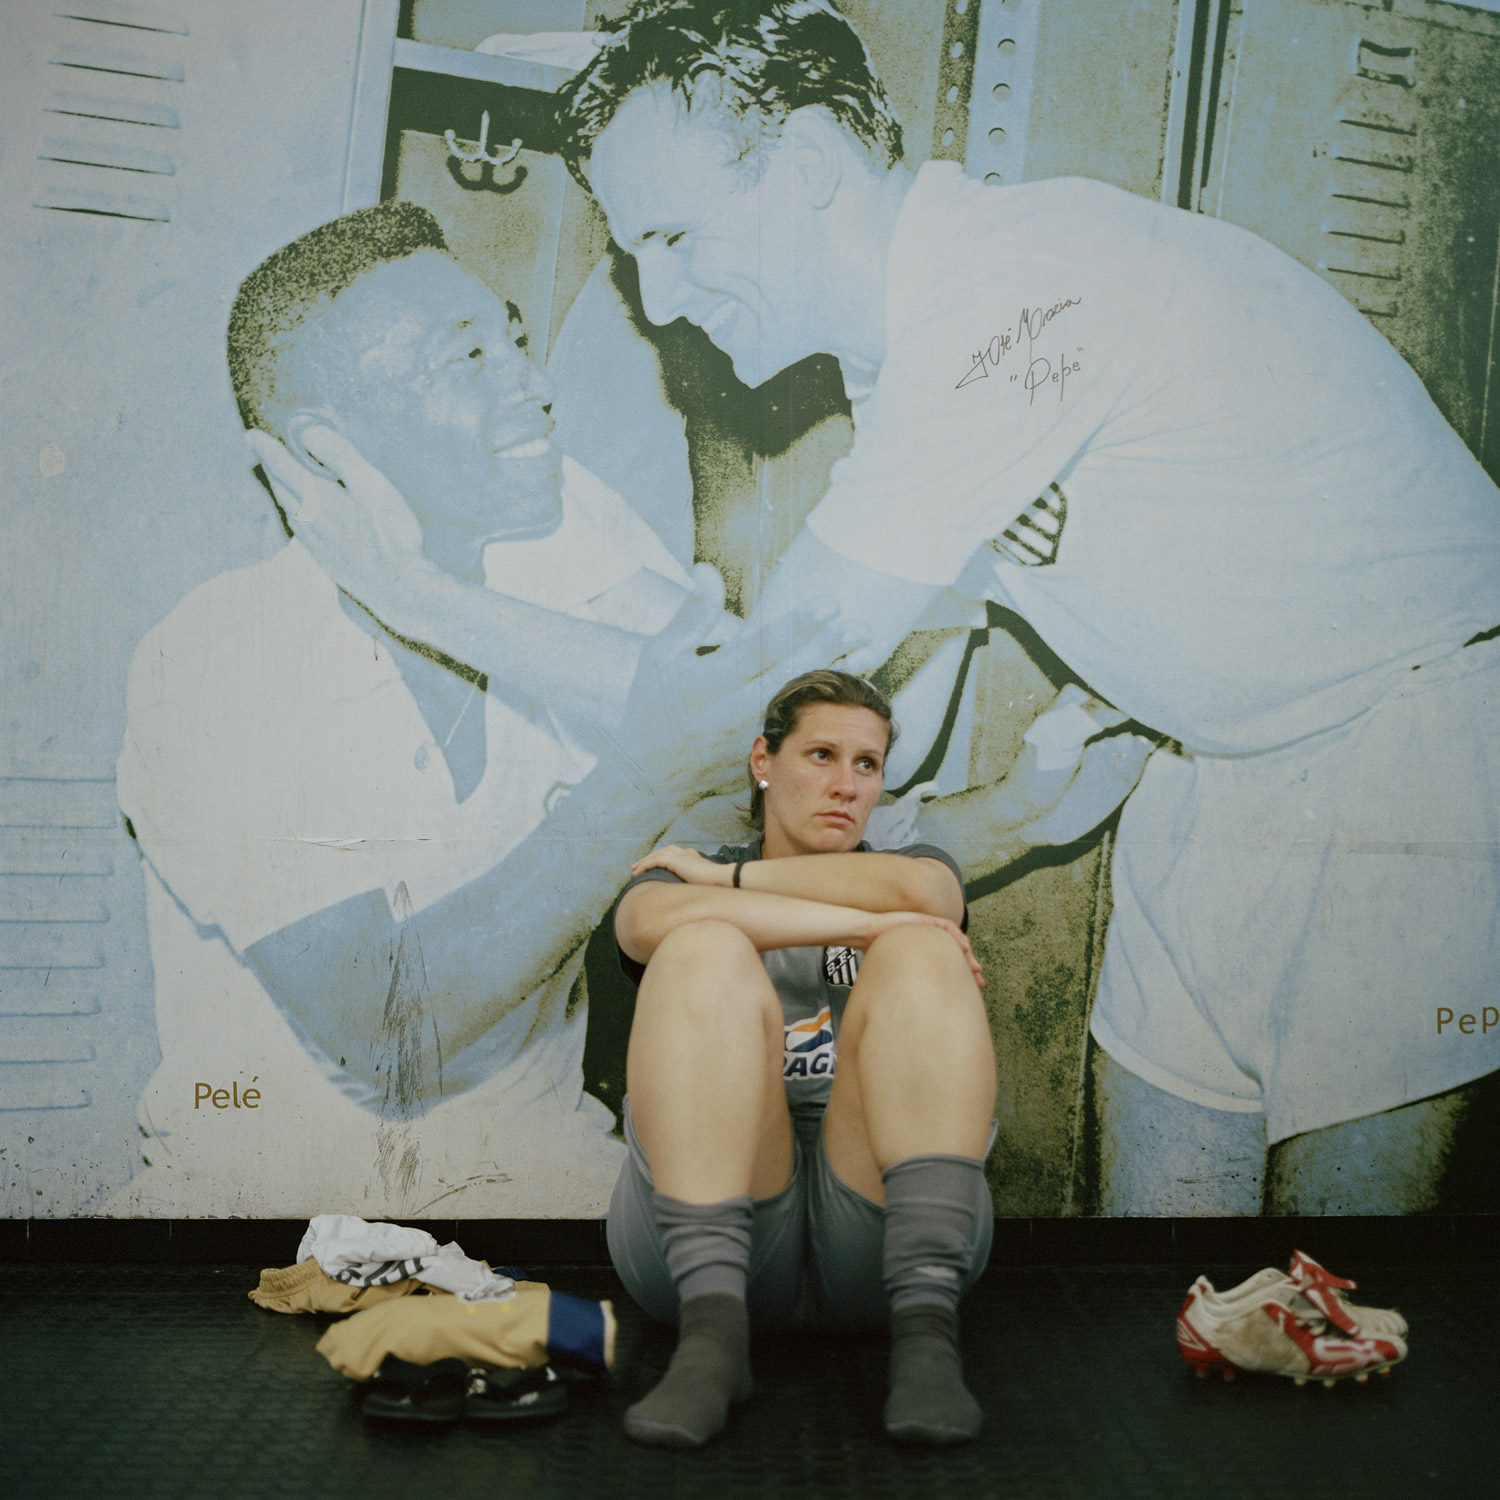 Santos goalkeeper Mayla, sits on the floor in front of a mural photograph of Santos FC men's legends, Pelé and Pepe, in the Estádio Vila Belmiro locker room.  Santos FC is known all over the world as the club where Pelé, the king of futebol, started his career at the age of 15. (December 3, 2010)